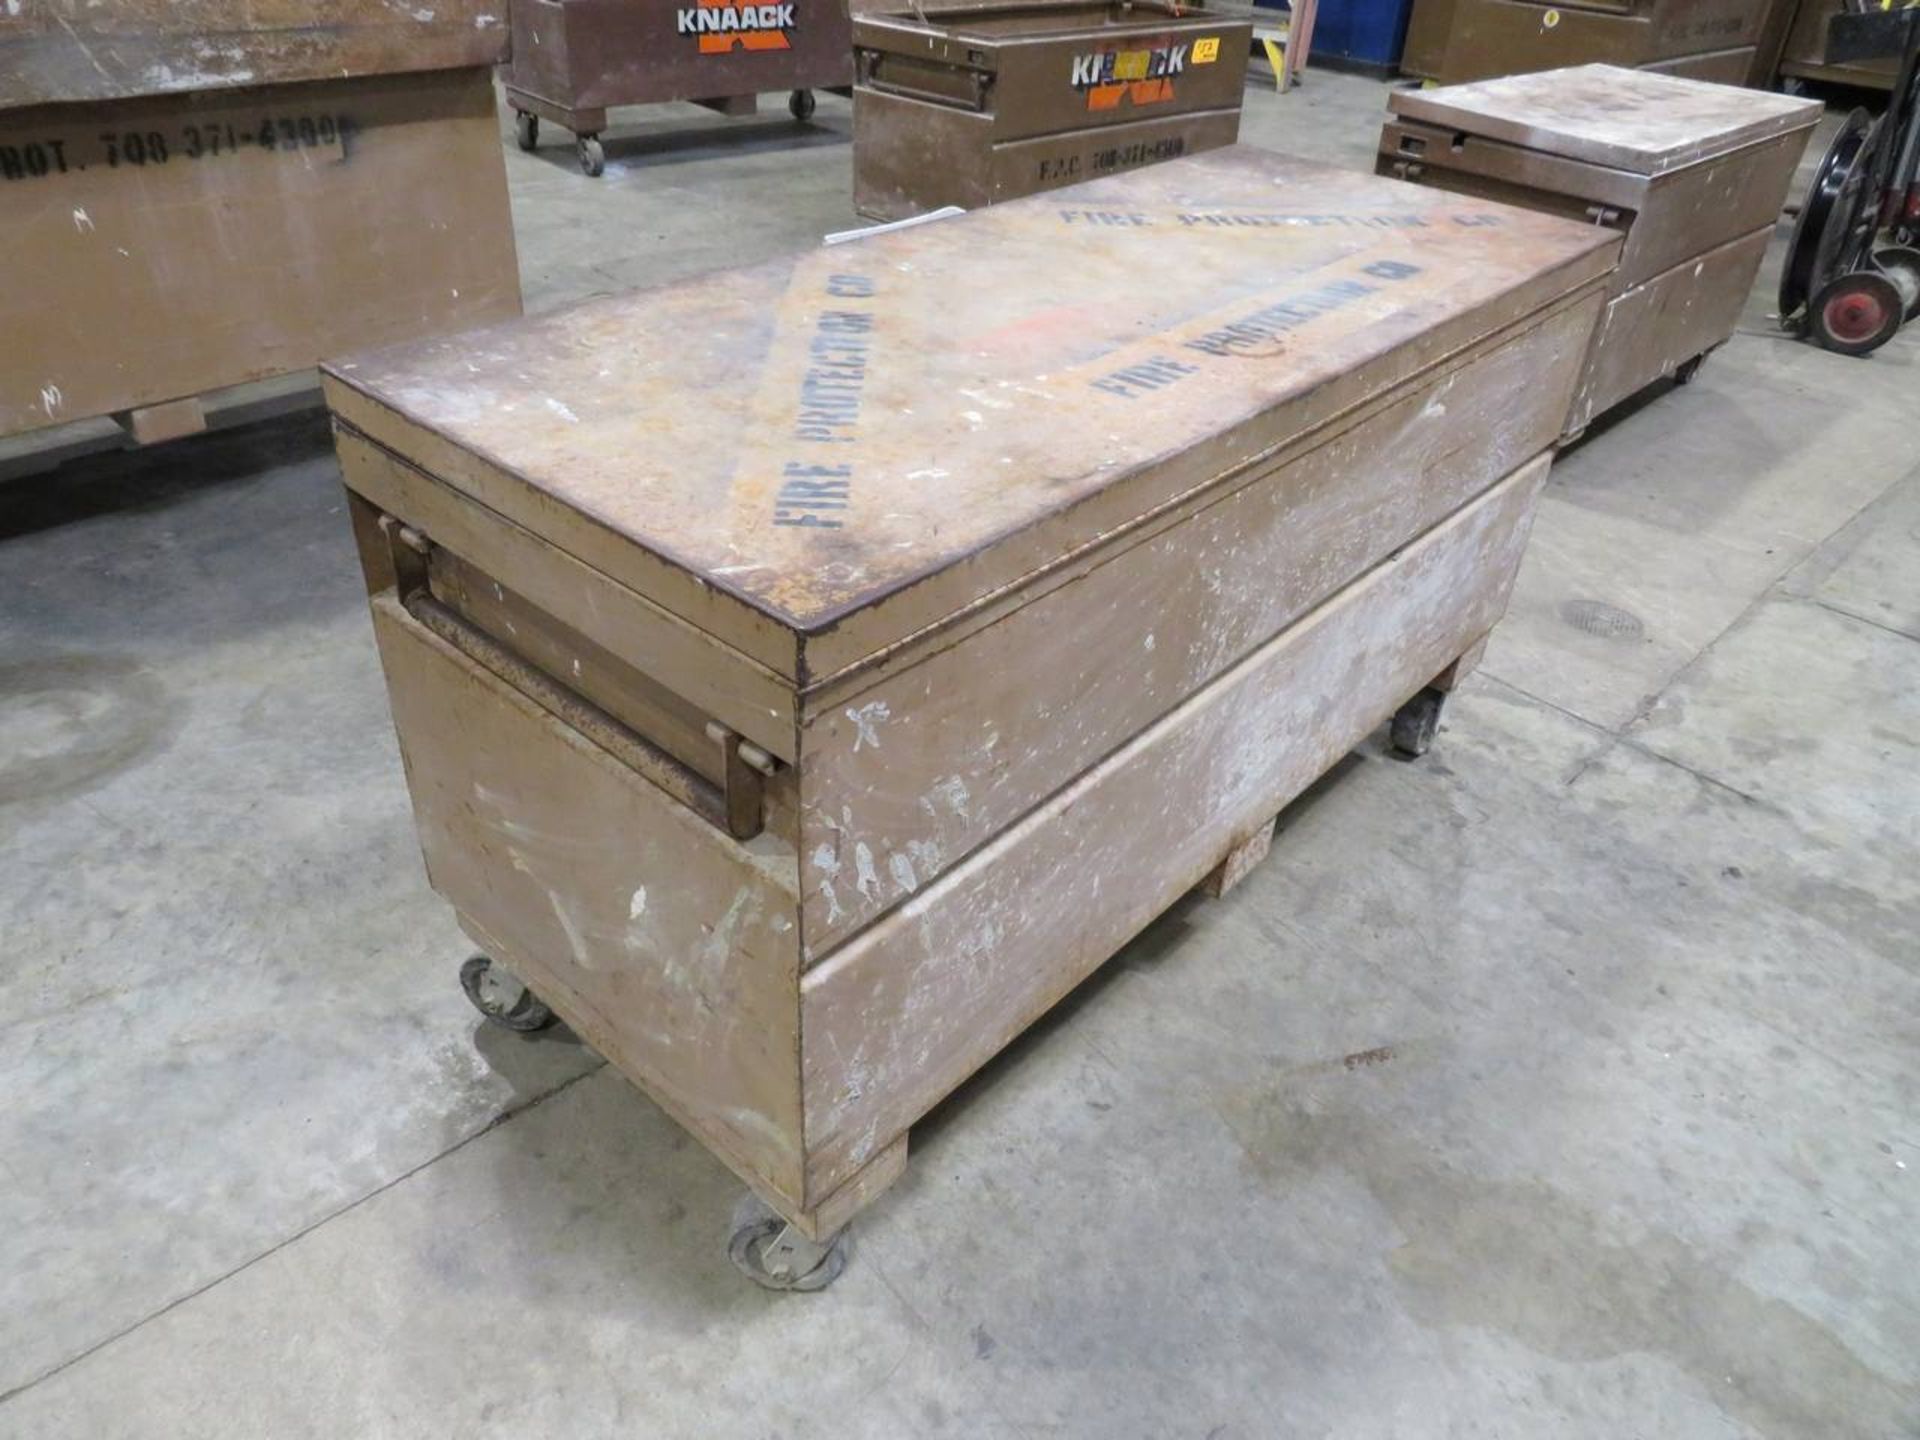 Knaack 20.25 Cu. Ft. - Approx. 60" W x 24" D x 35" H Storage Chest - Image 5 of 6